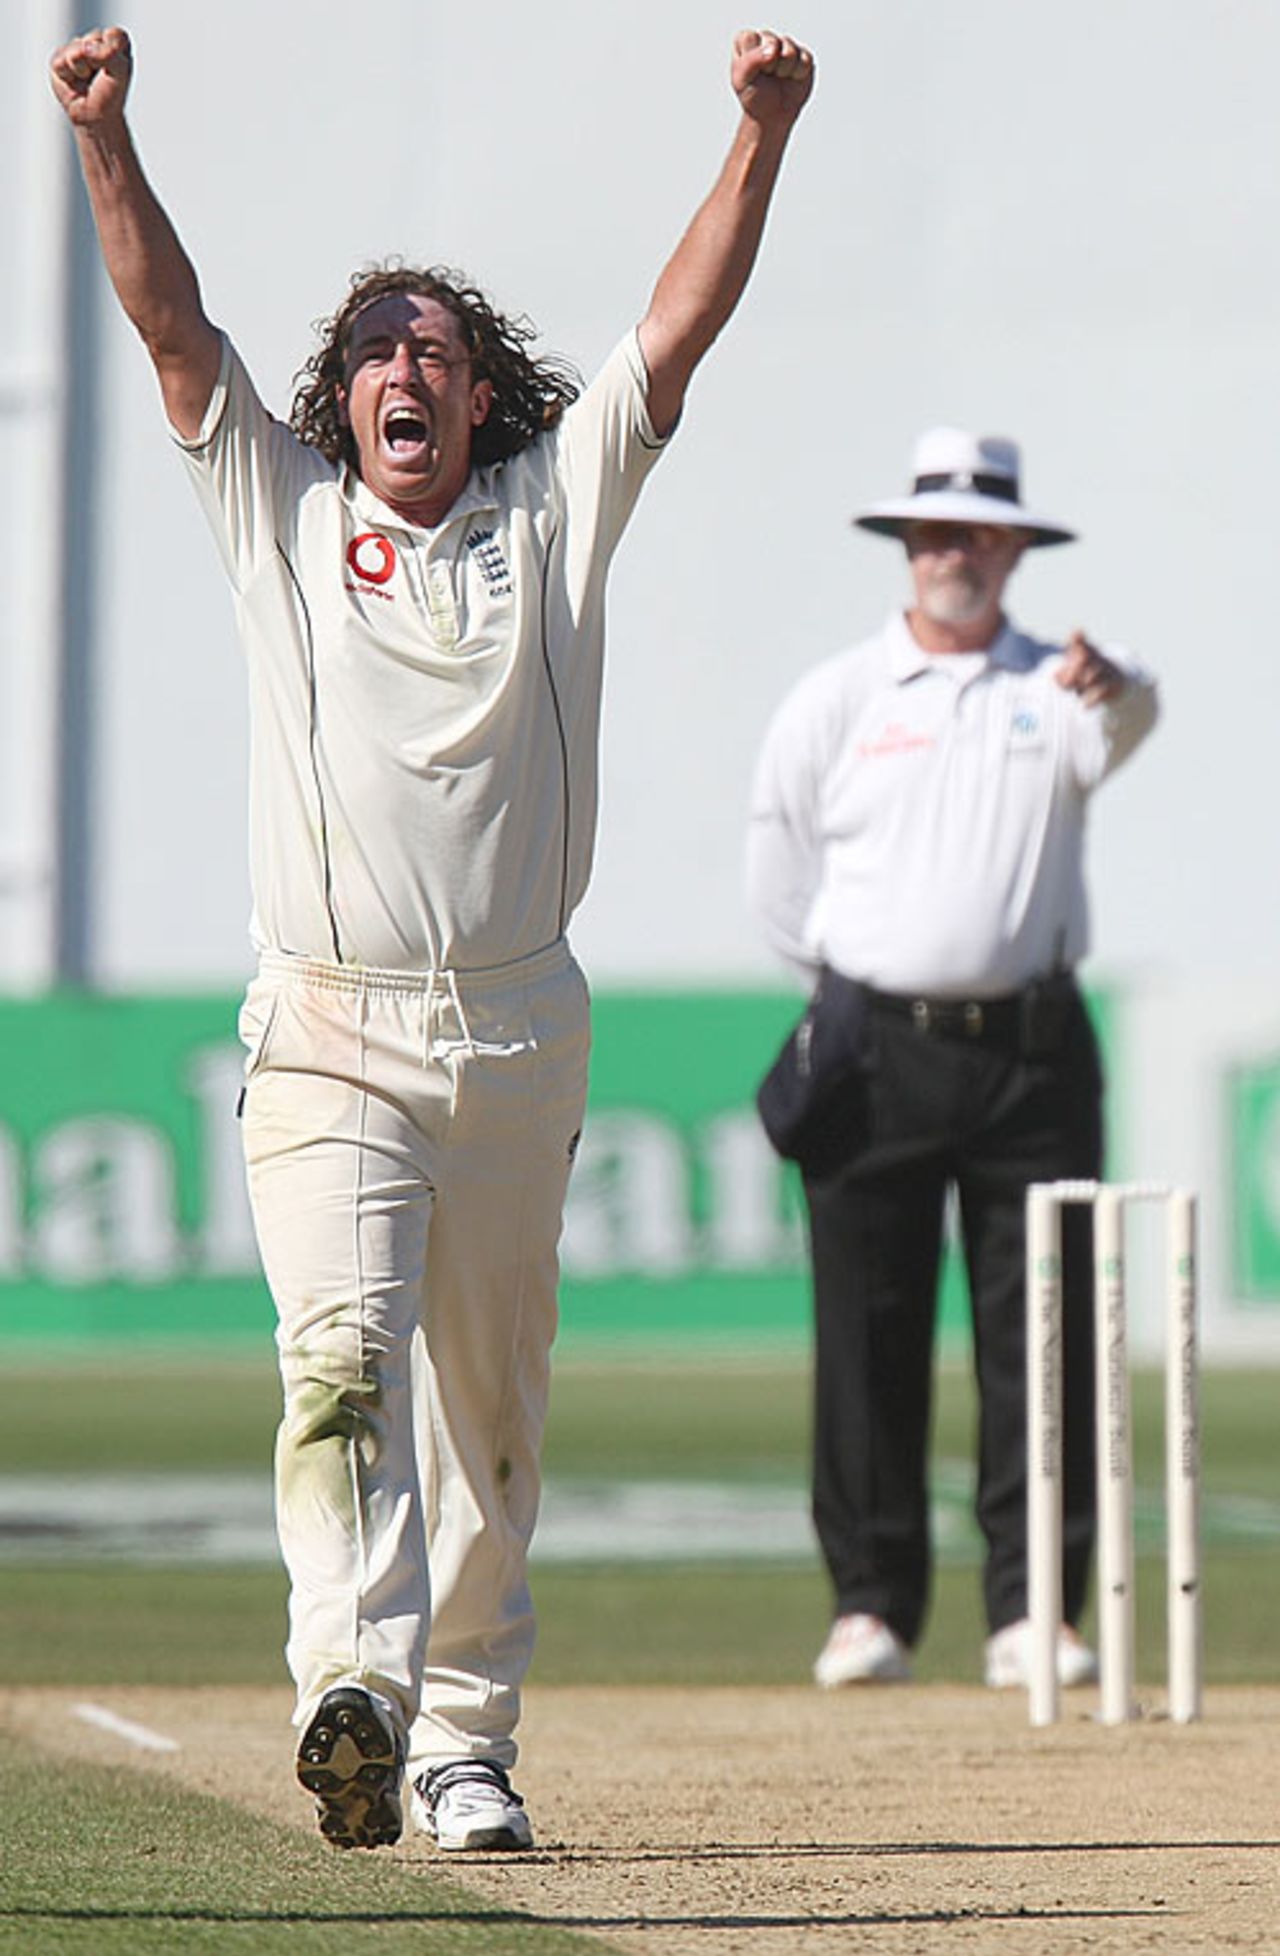 Ryan Sidebottom raises his arms after dismissing Kyle Mills, New Zealand v England, 2nd Test, Wellington, March 17, 2008